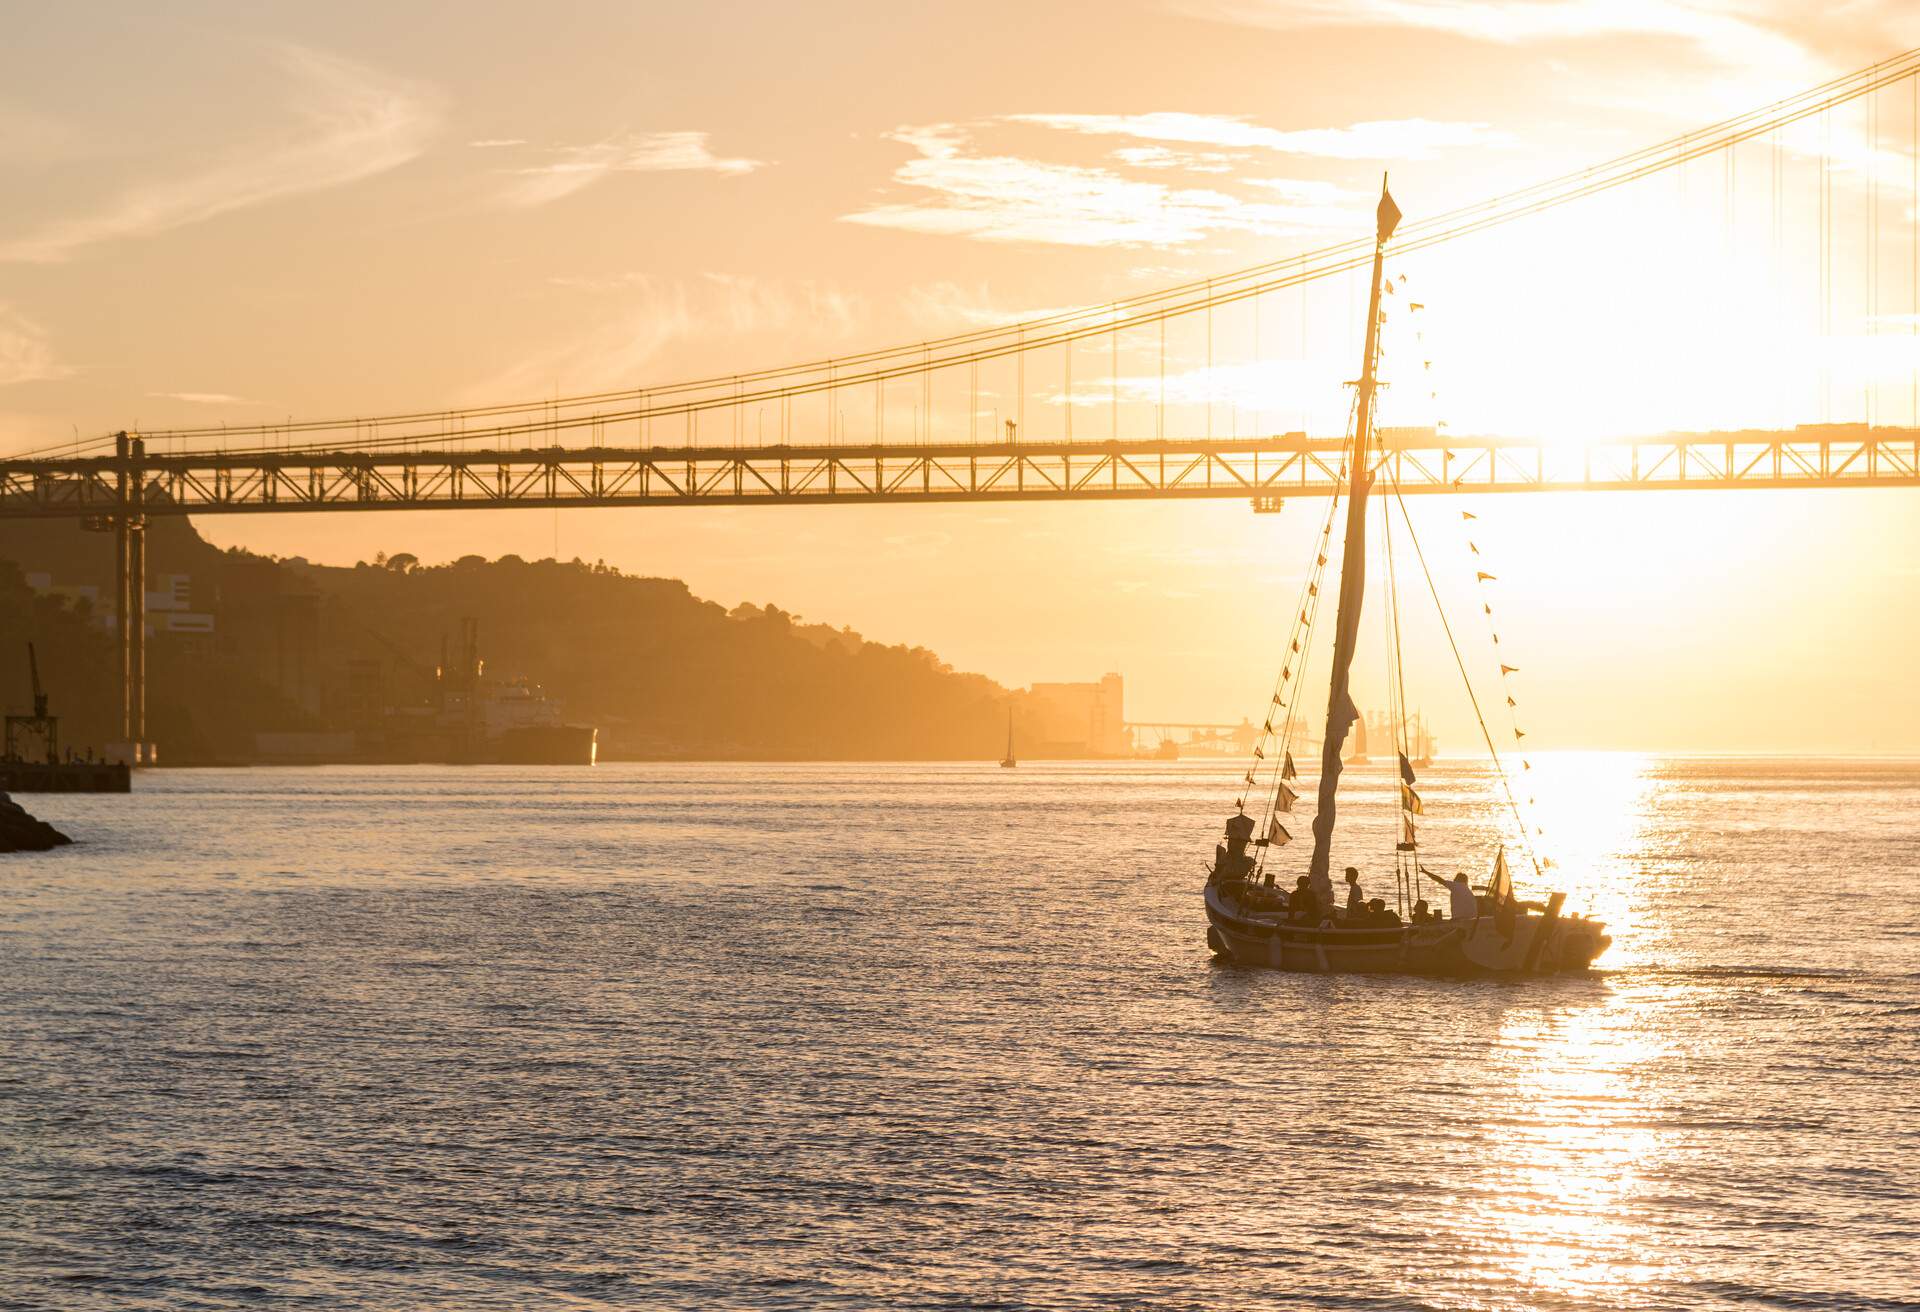 A ship sailing across a river spanned by a suspension bridge at sunset.